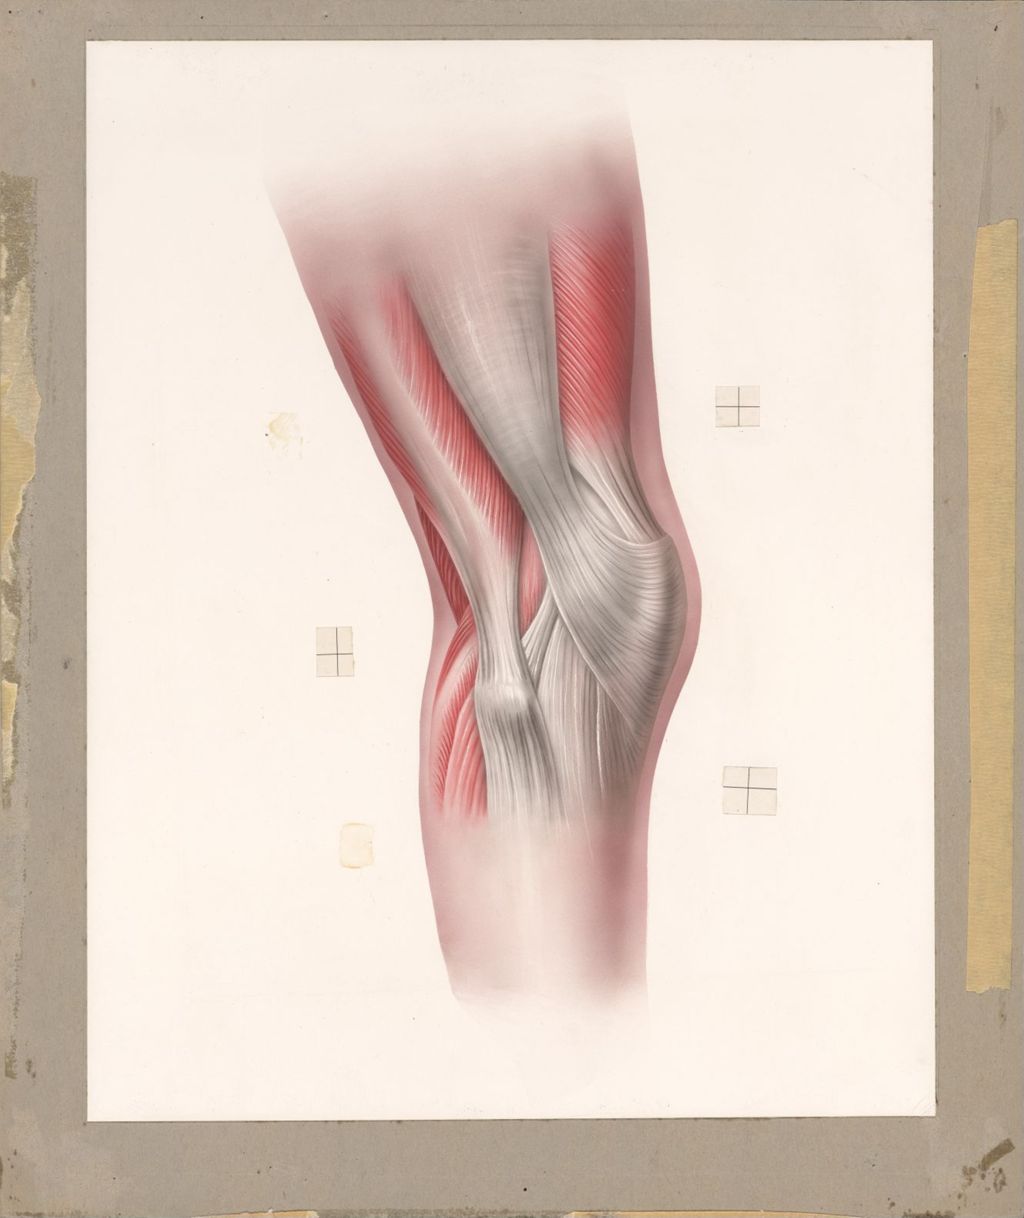 Miniature of Normal, relaxed muscles of the knee joint